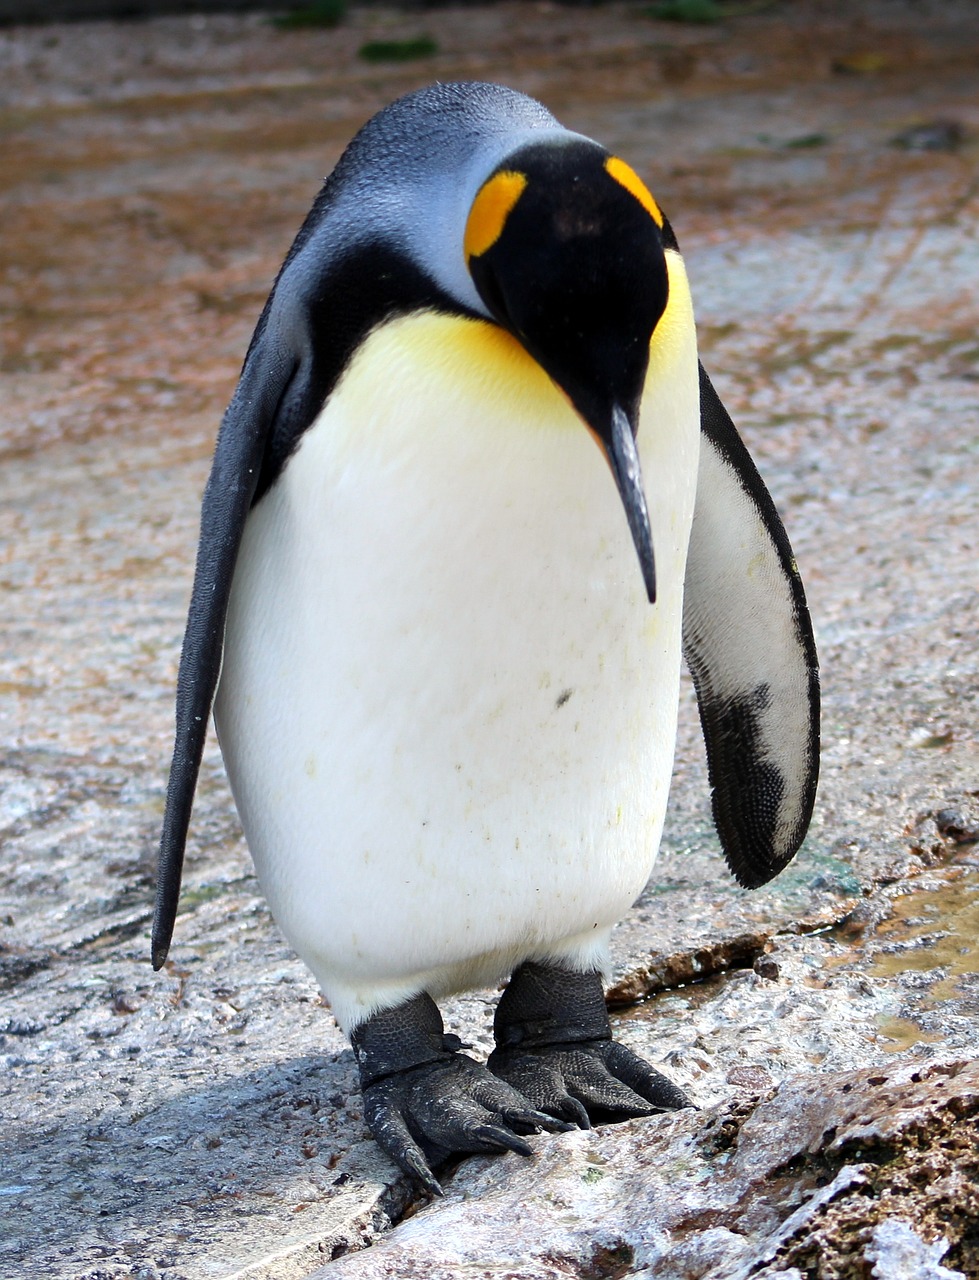 a close up of a penguin on a rock, by Robert Brackman, shutterstock, draped in shiny gold and silver, focus on his foot, modern very sharp photo, stock photo